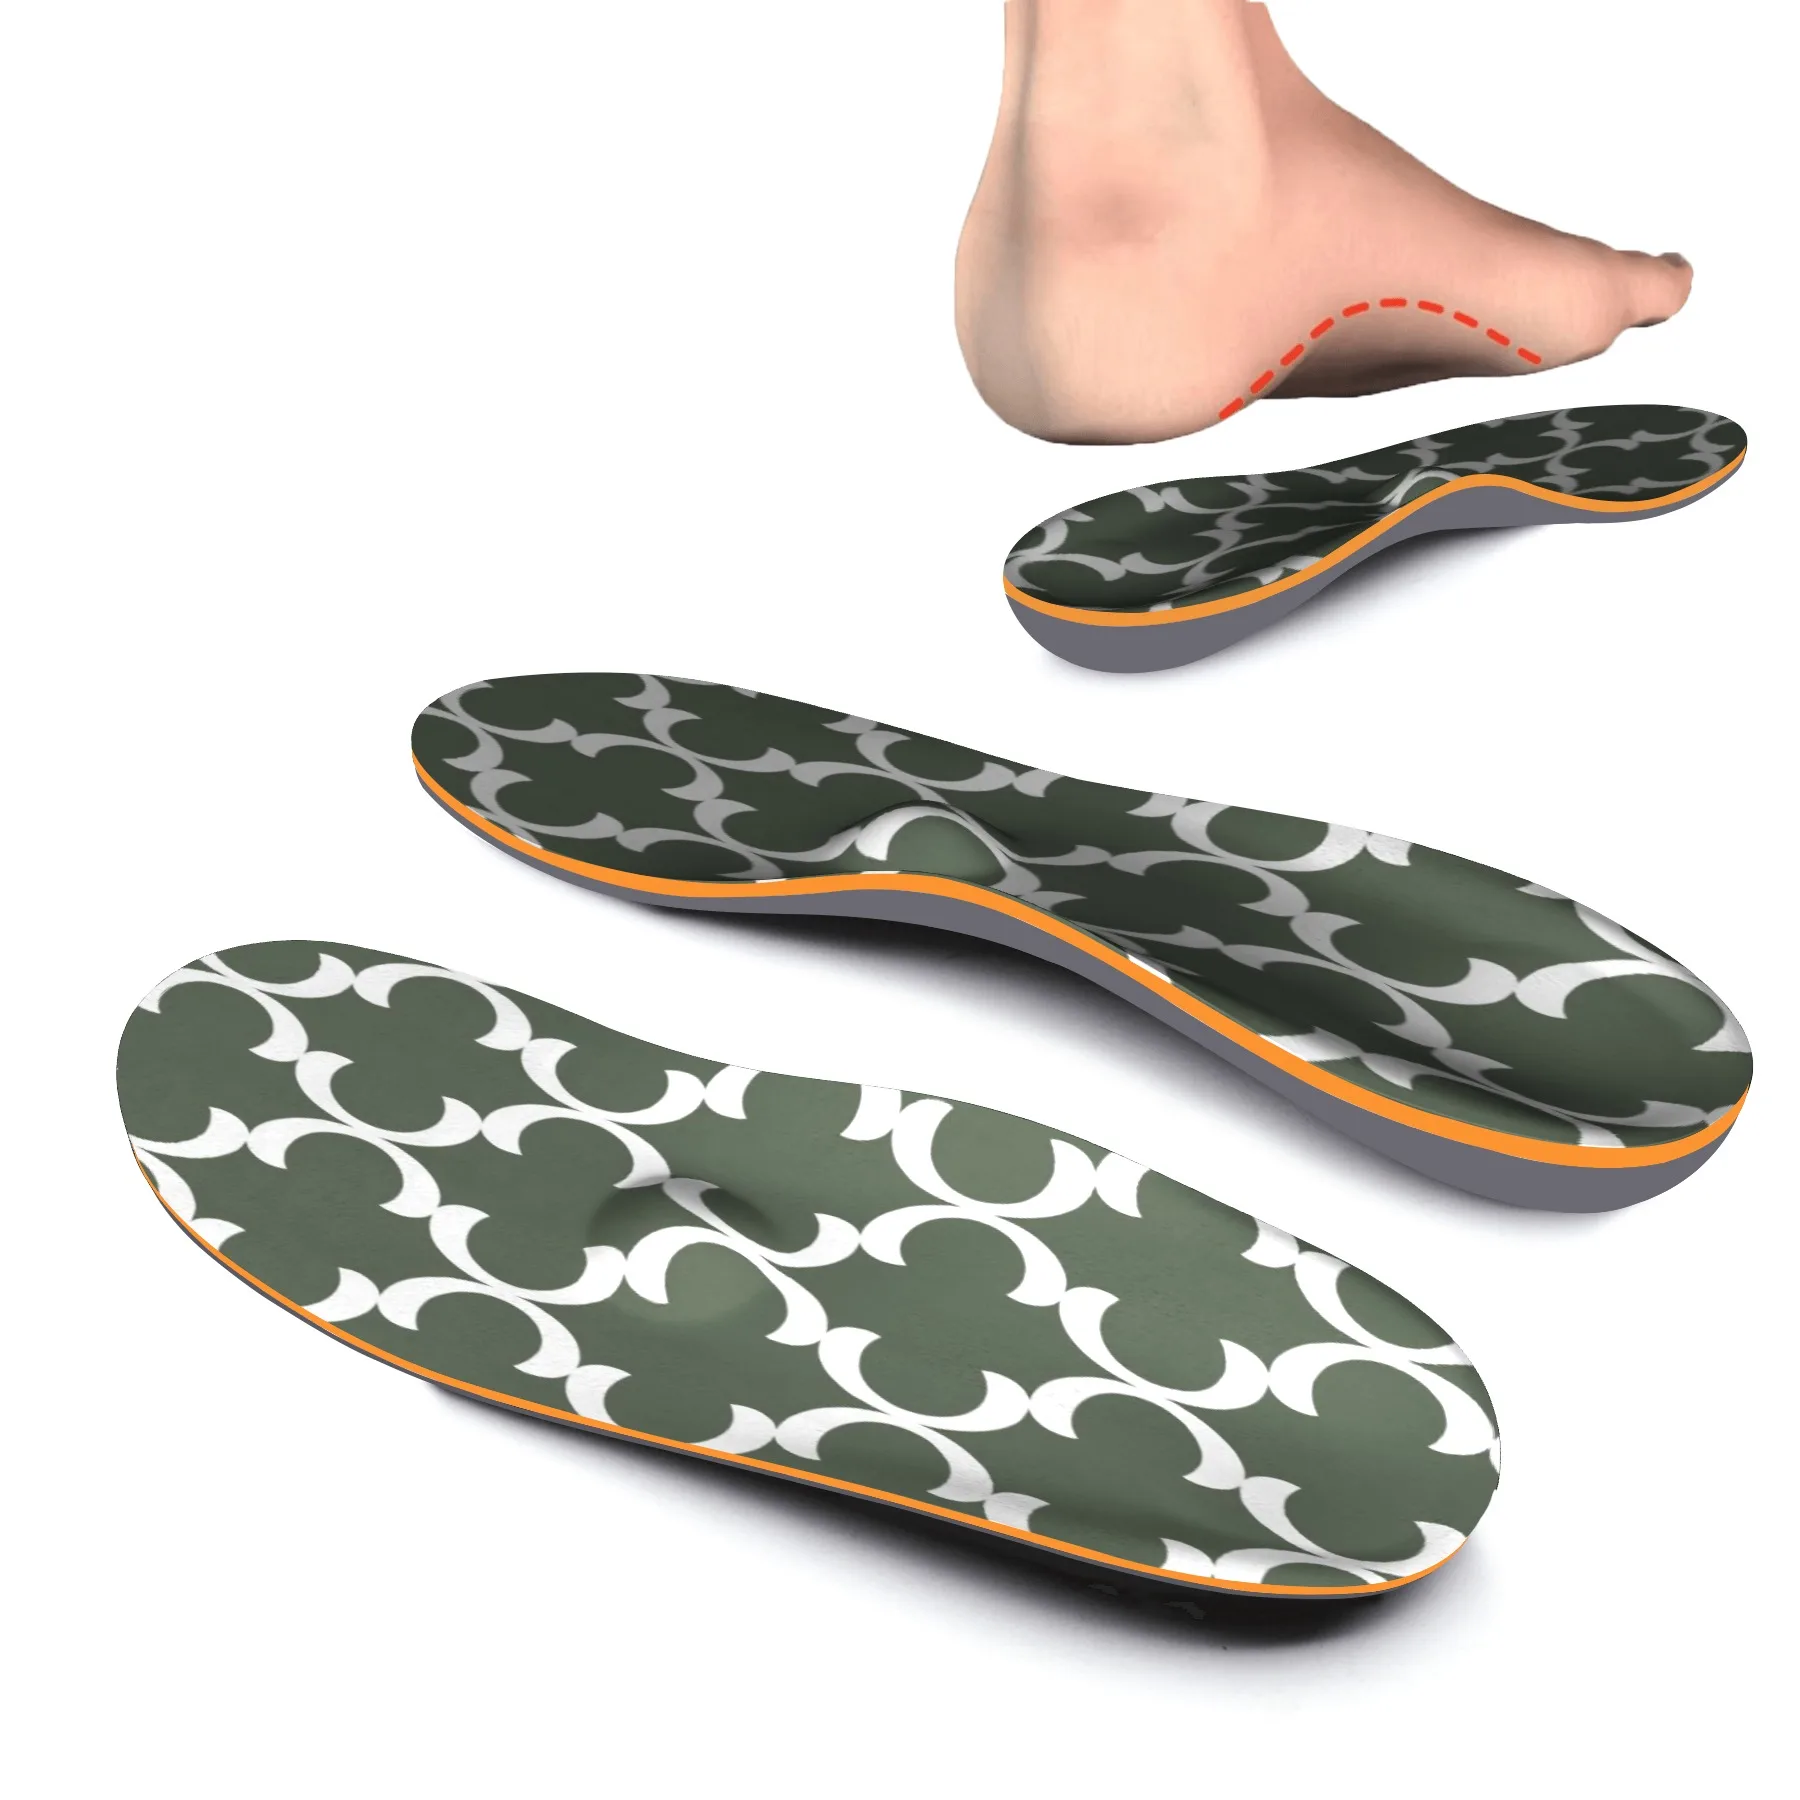 

EVA Orthotic Inserts with Arch Support-Best Insoles Memory Foam for Plantar Fasciitis,Flat Feet,Heel Spurs&Sore Foot Relief